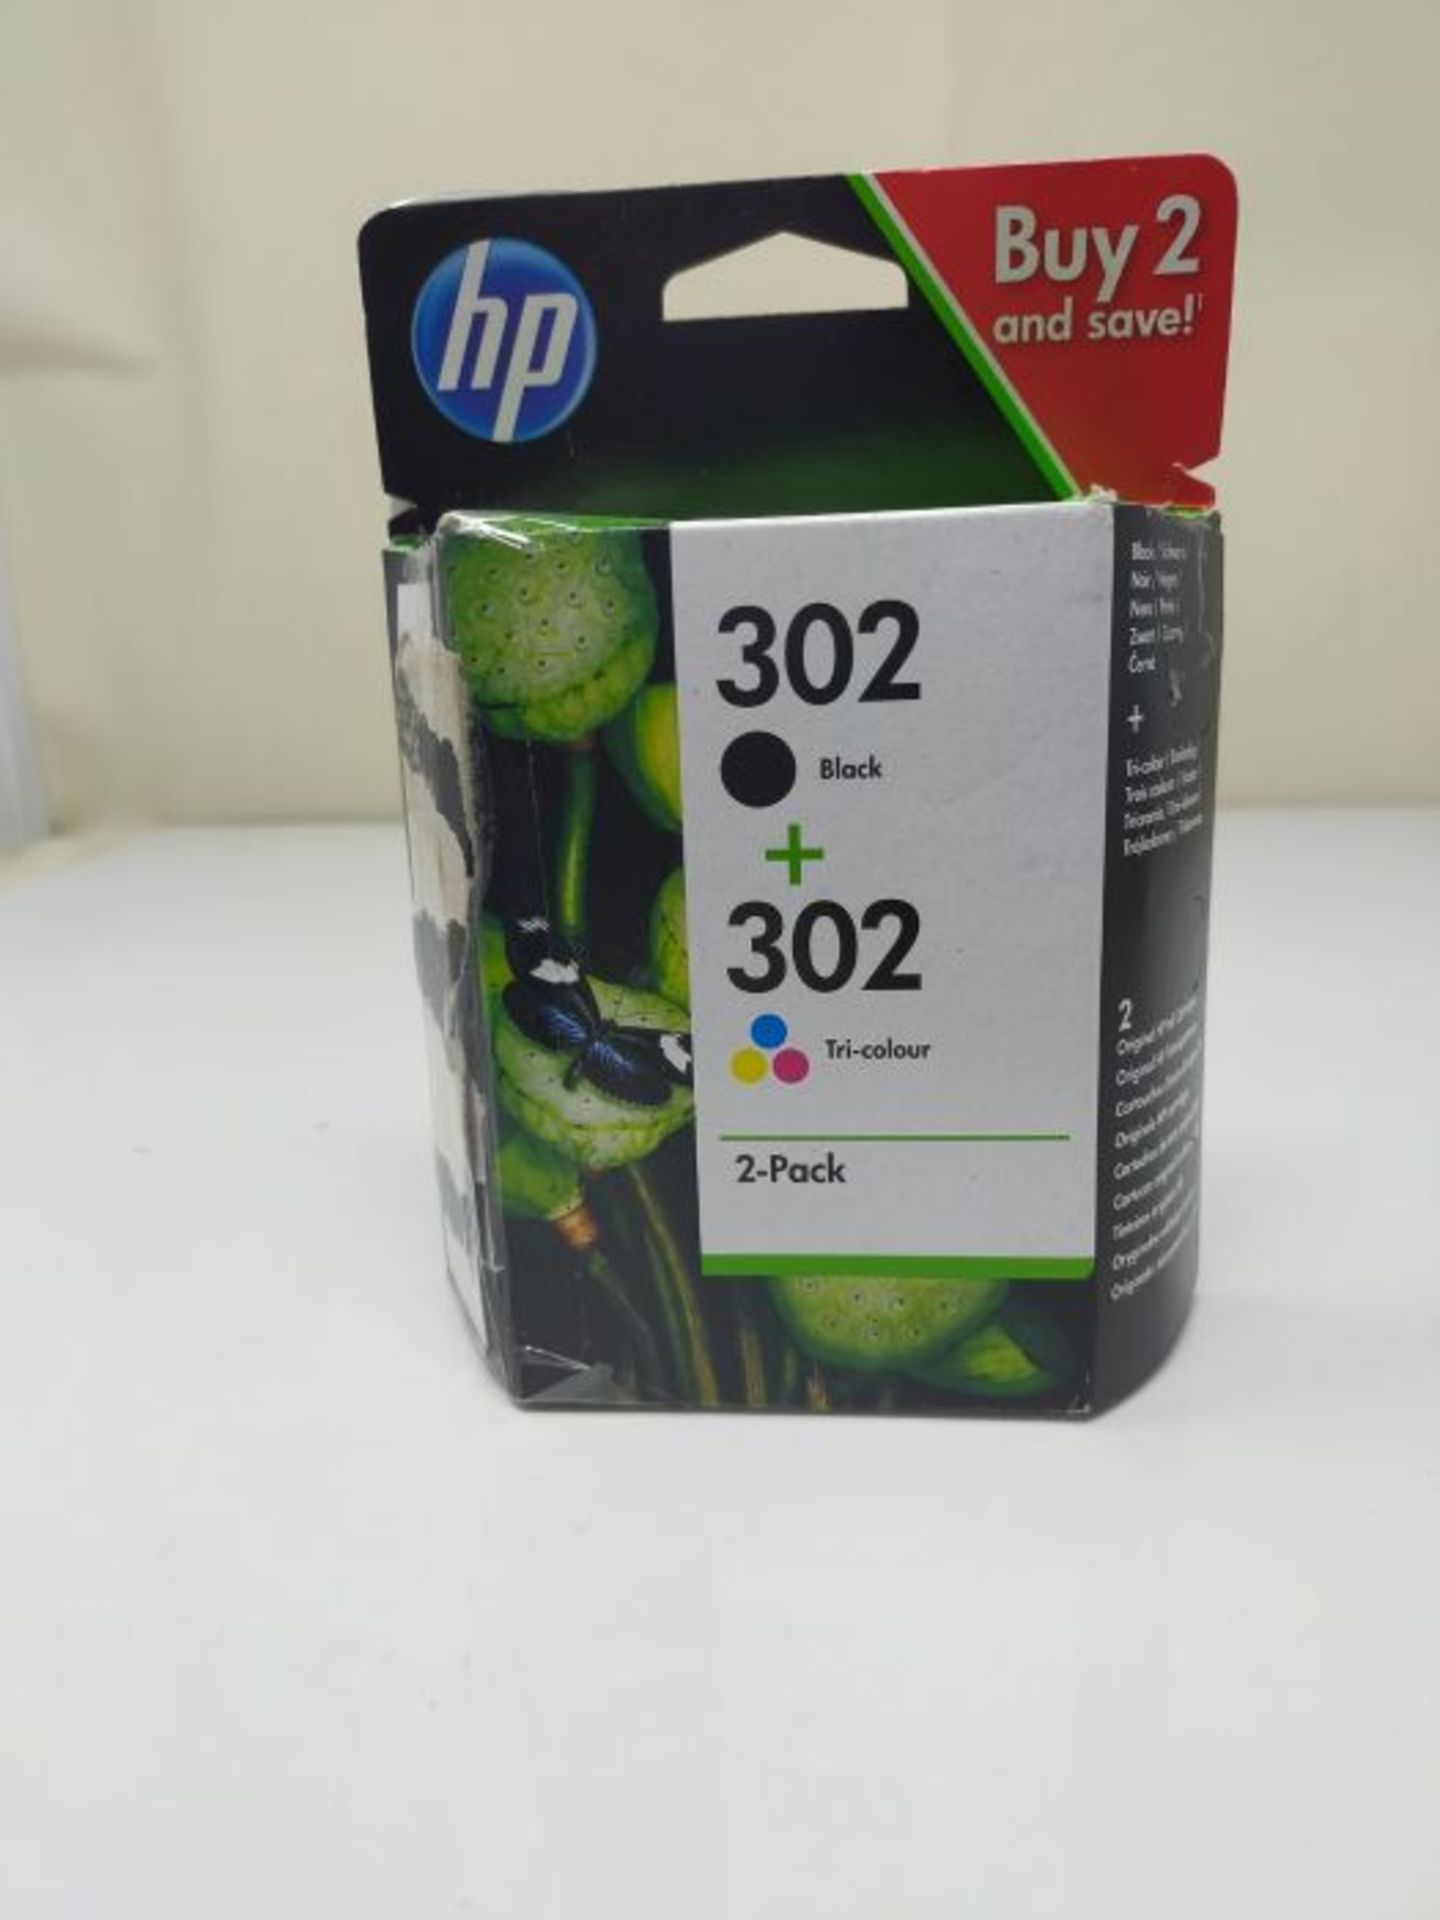 [CRACKED] HP X4D37AE 302 Original Ink Cartridges, Black and Tri-colour, Multipack - Image 2 of 3